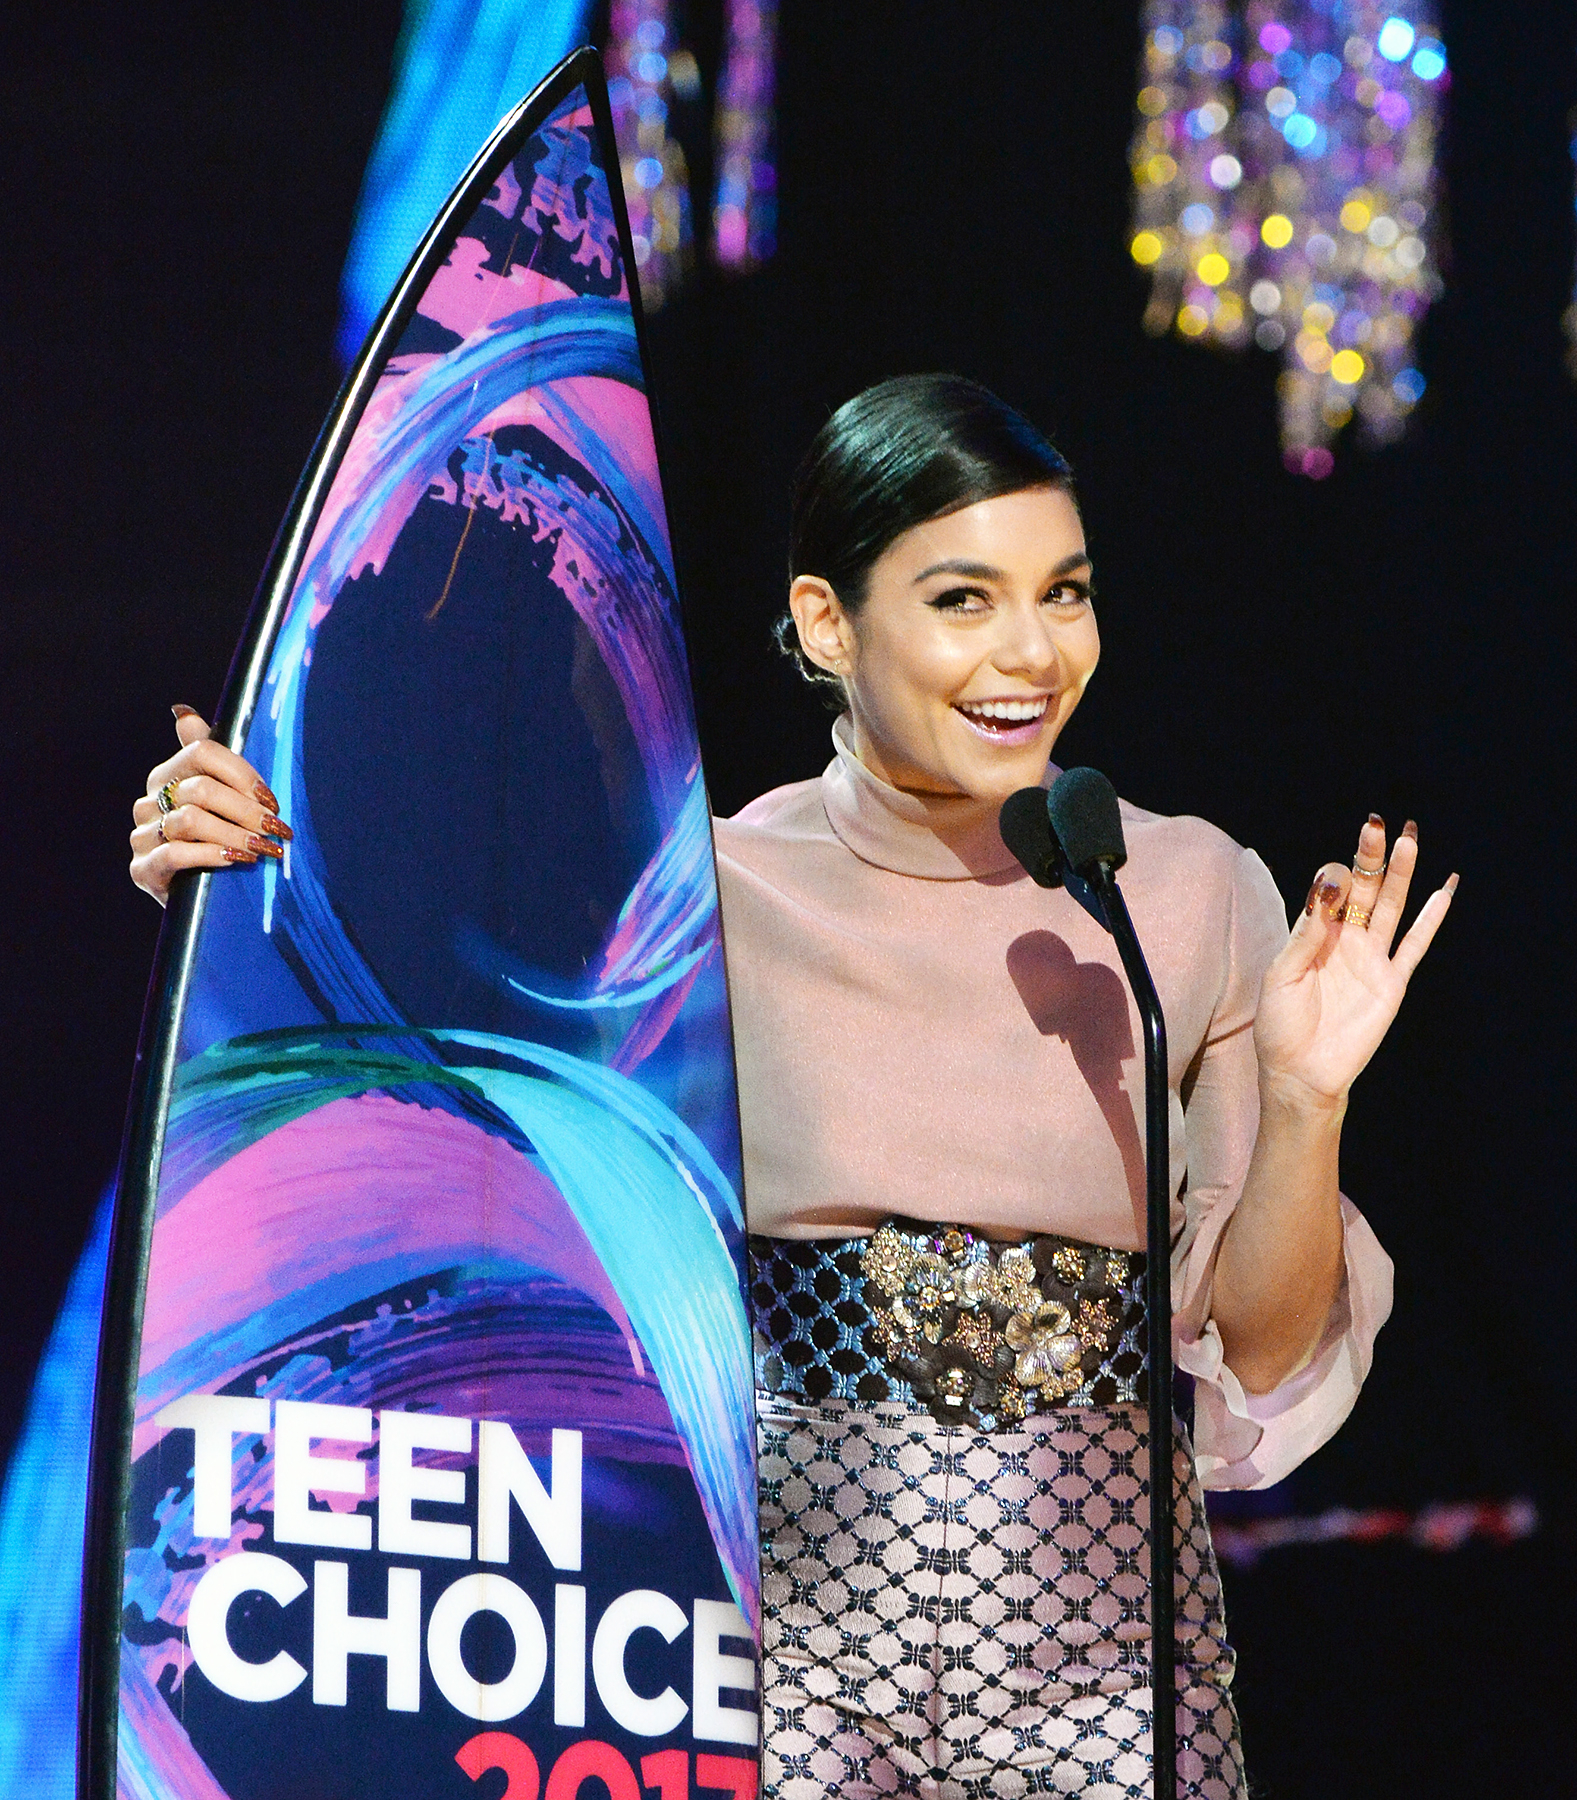 Louis Tomlinson Accepts Surfboard for Choice Male Artist at Teen Choice  Awards 2018!, 2018 teen choice awards, Louis Tomlinson, Teen Choice Awards